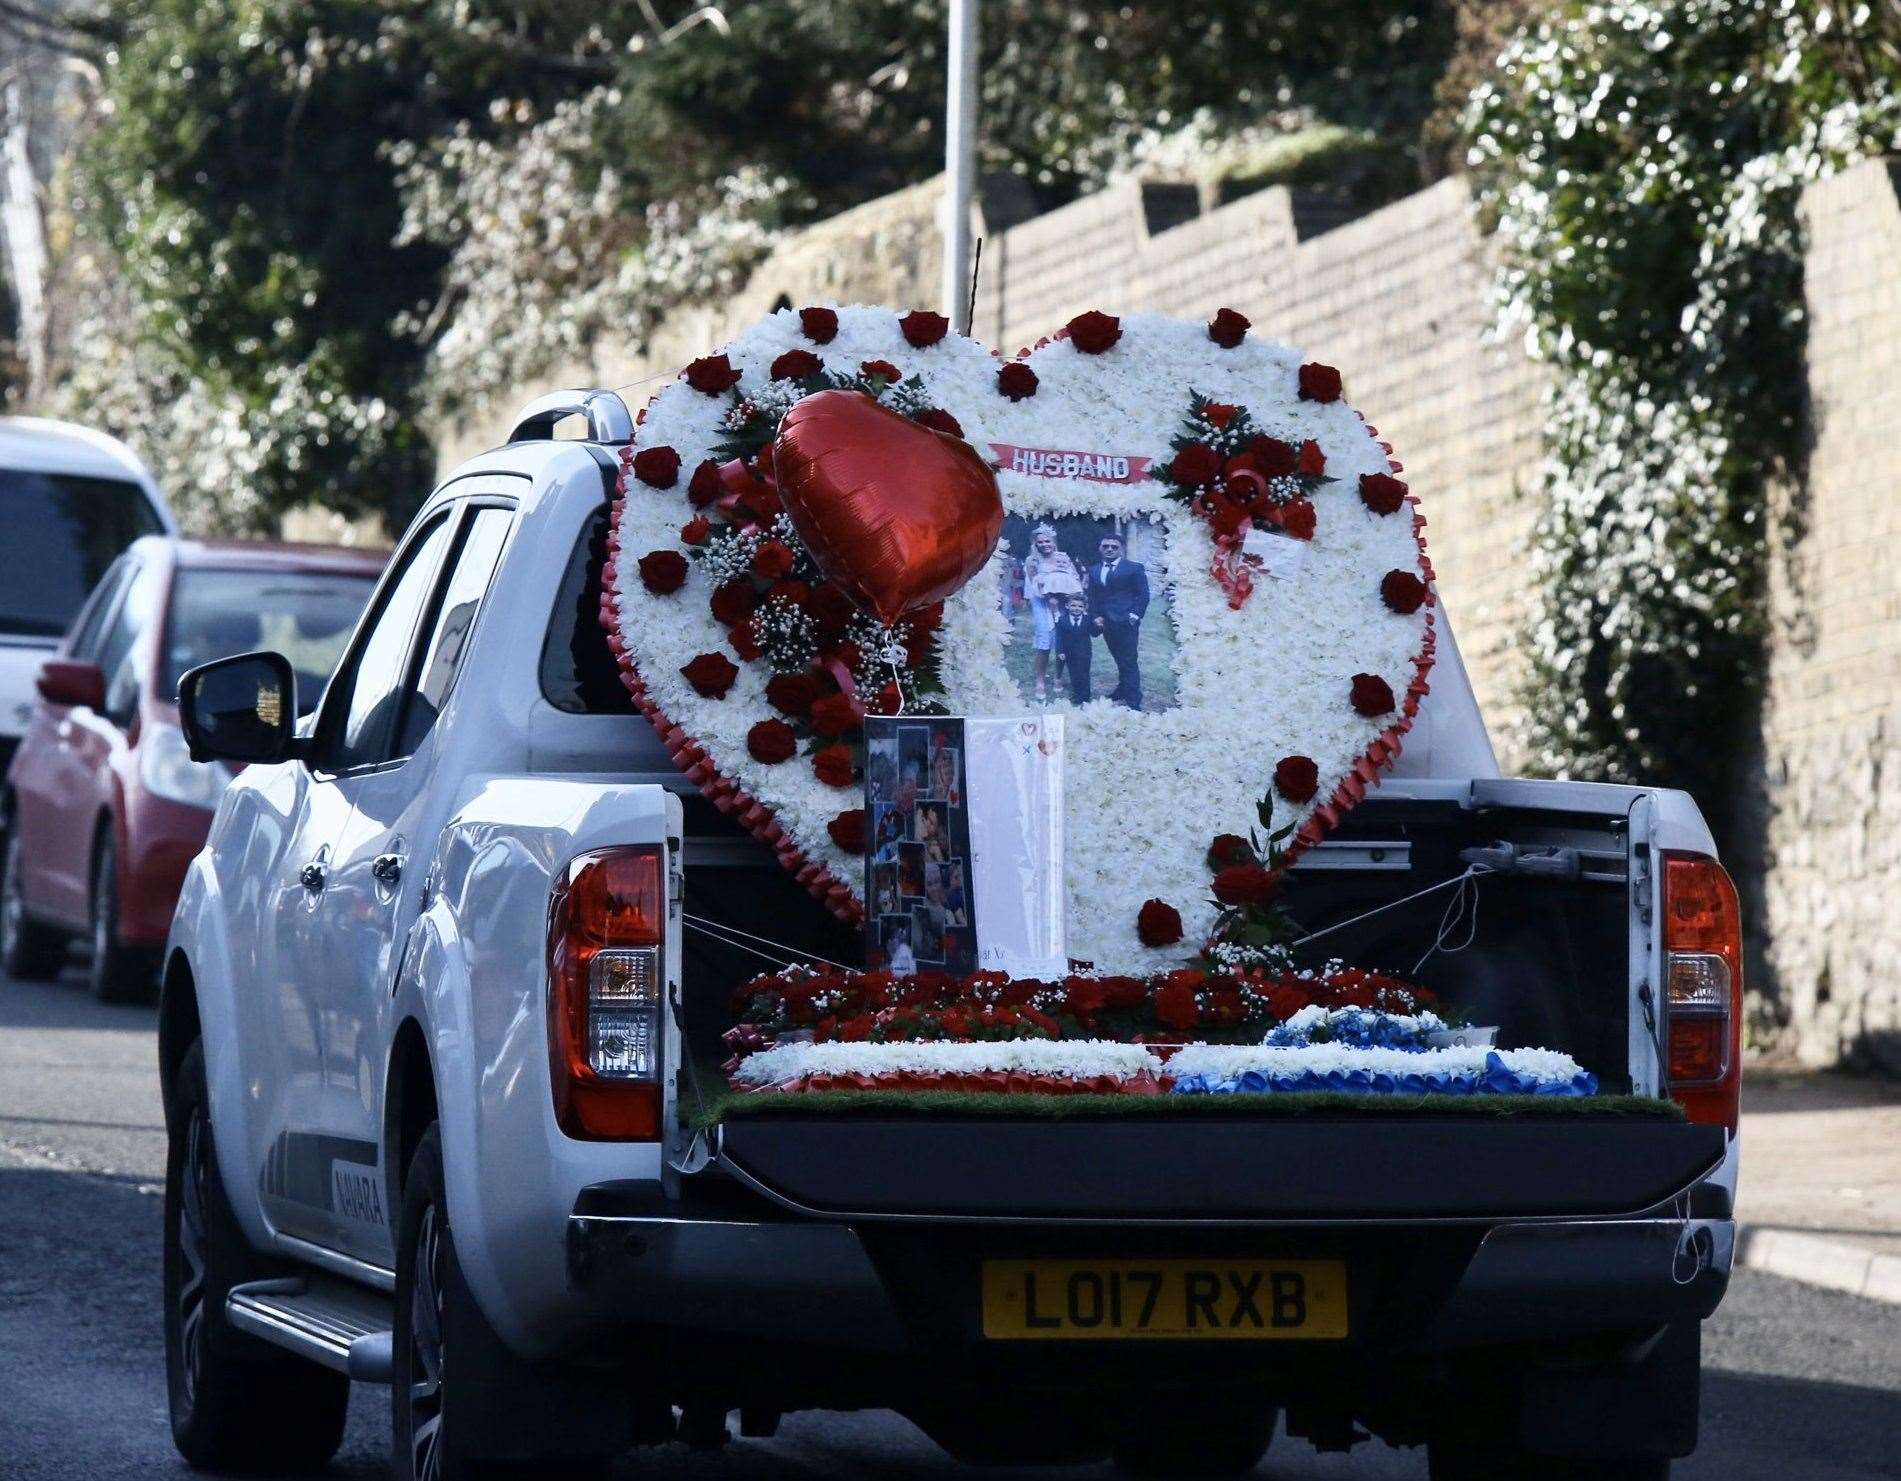 A 4x4 carrying a huge heart made of flowers. Picture: UKnip